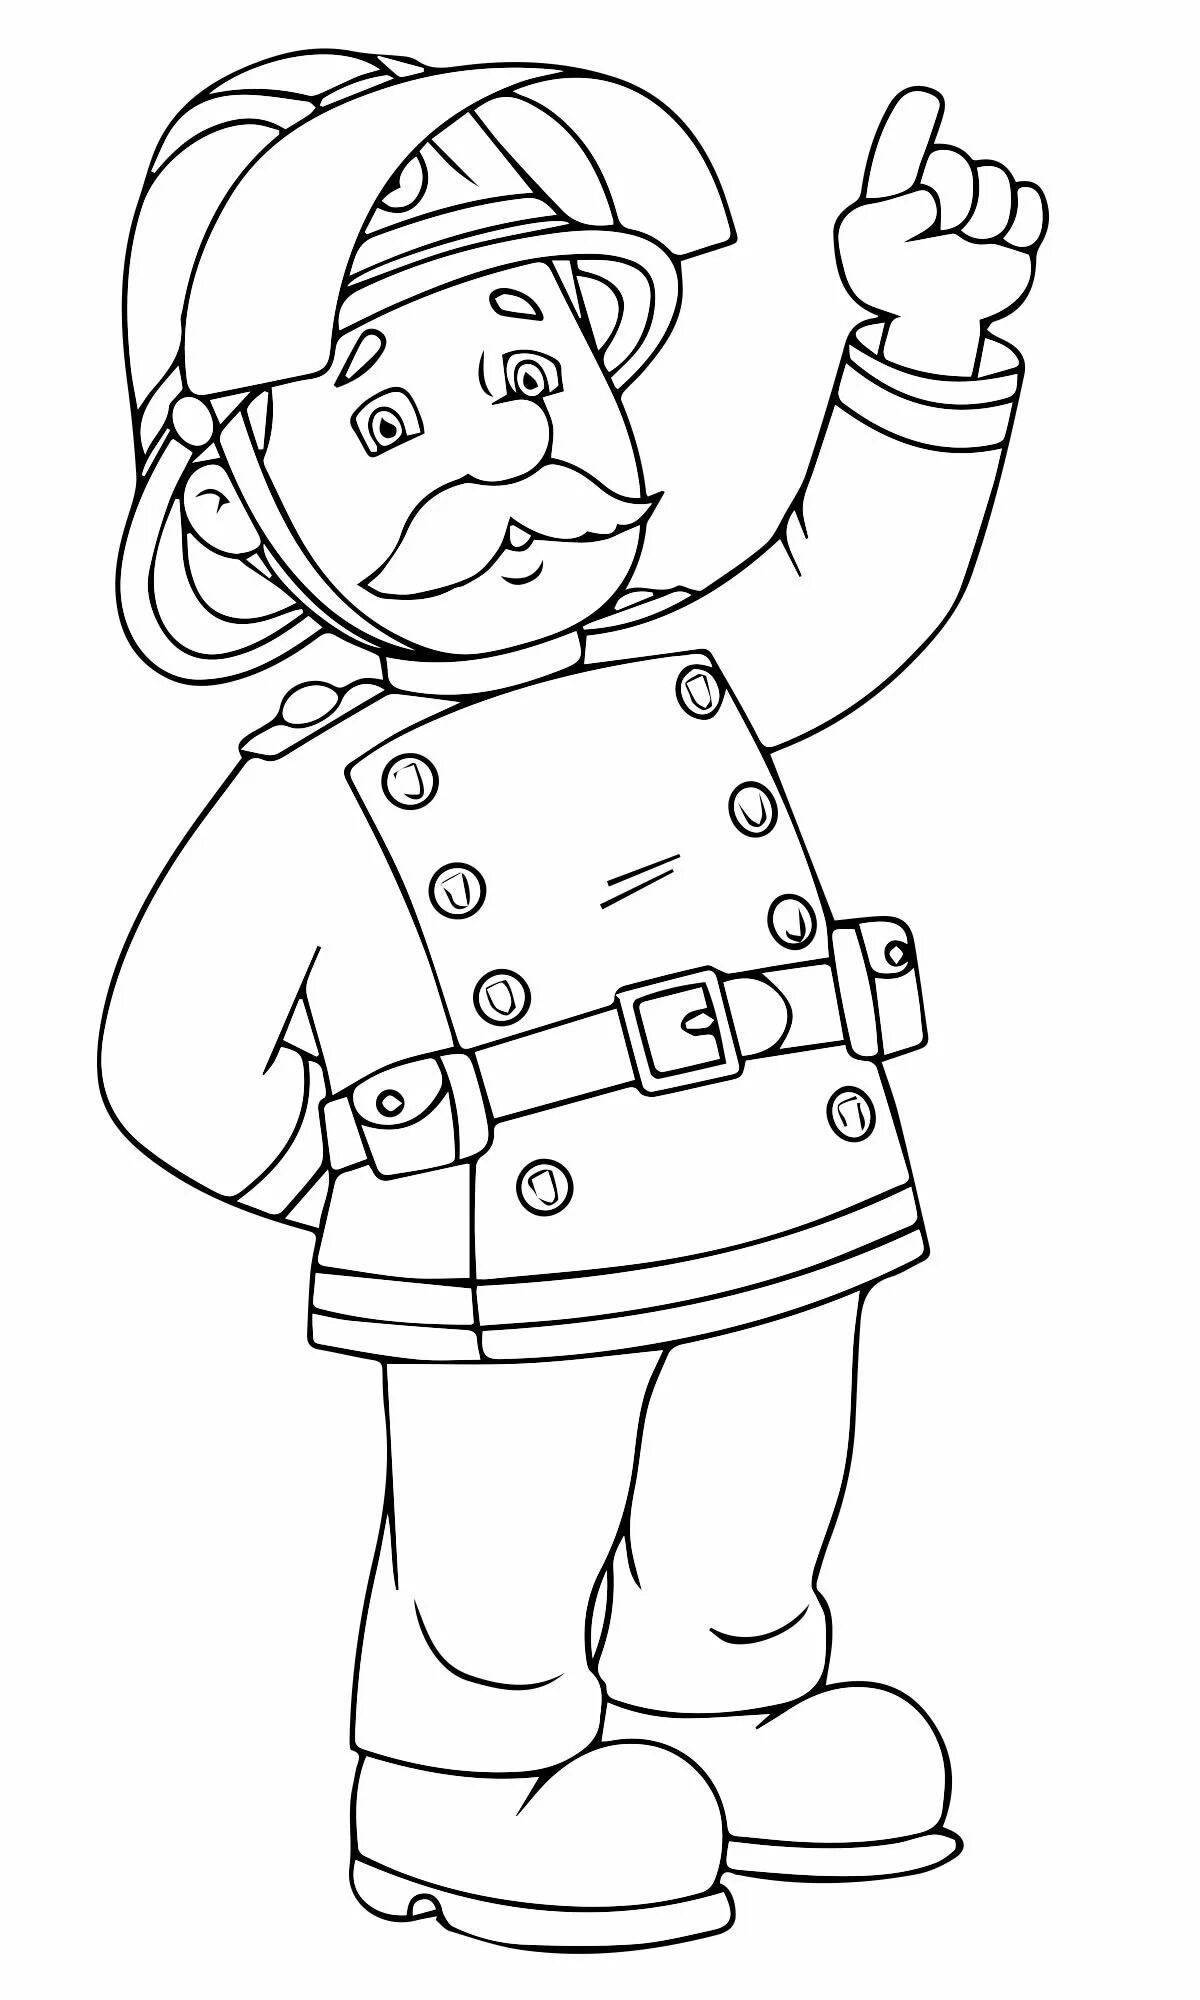 Coloring book is a fascinating profession of a firefighter